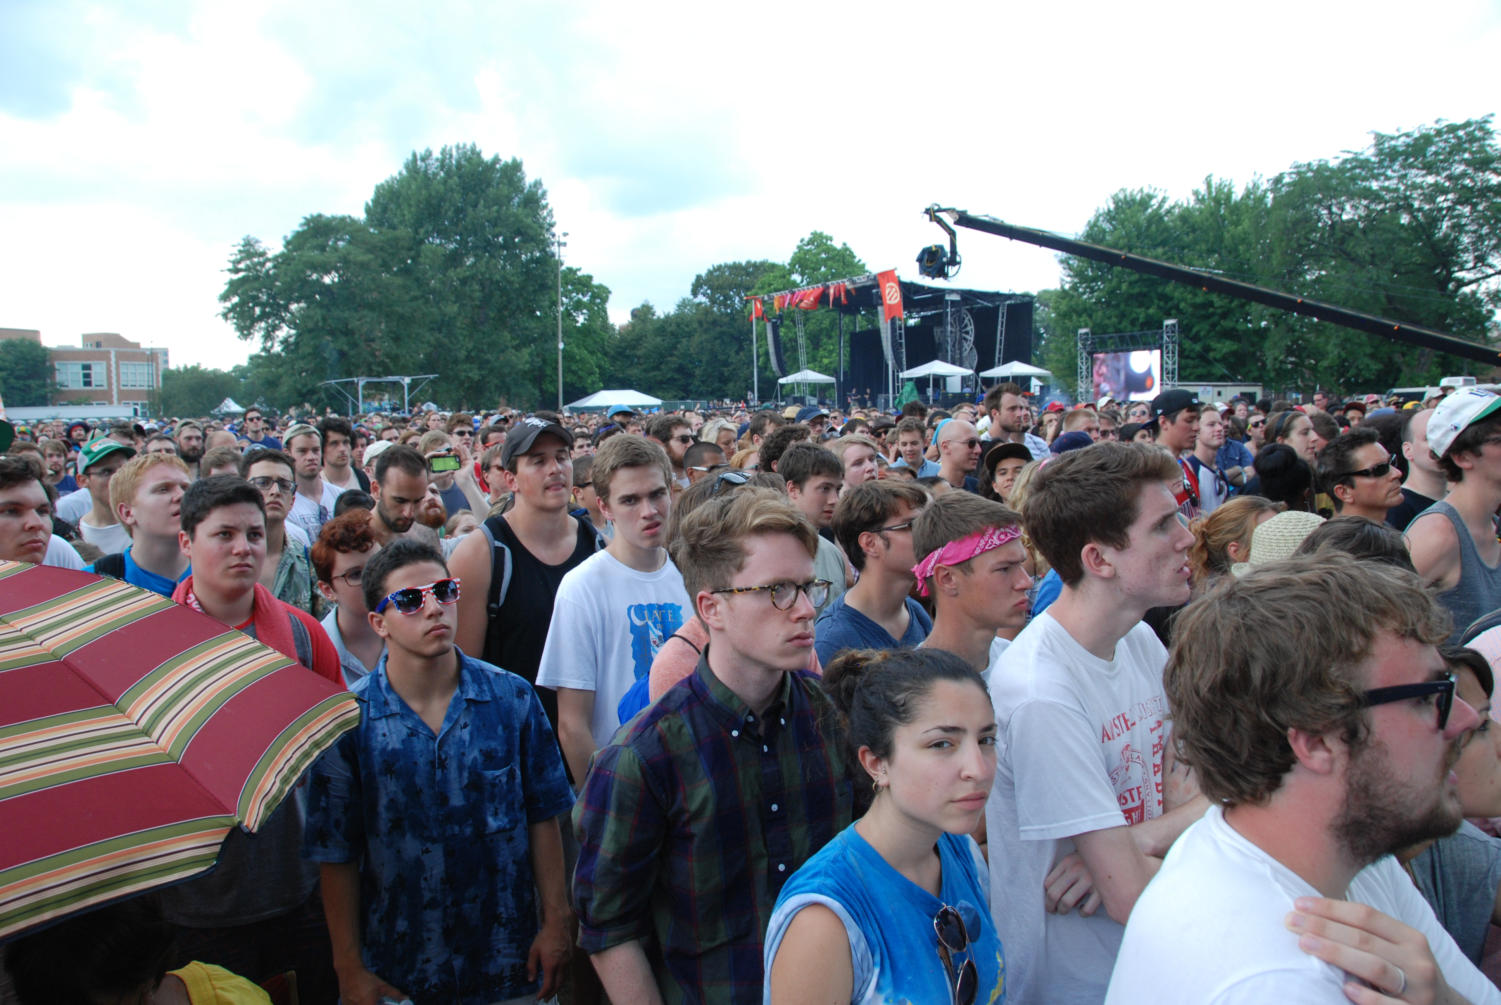 The Pitchfork Music Festival is a three-day music festival held every summer that gives exposure to acts from genres like alternative rock, electronica, hip hop and dance music.